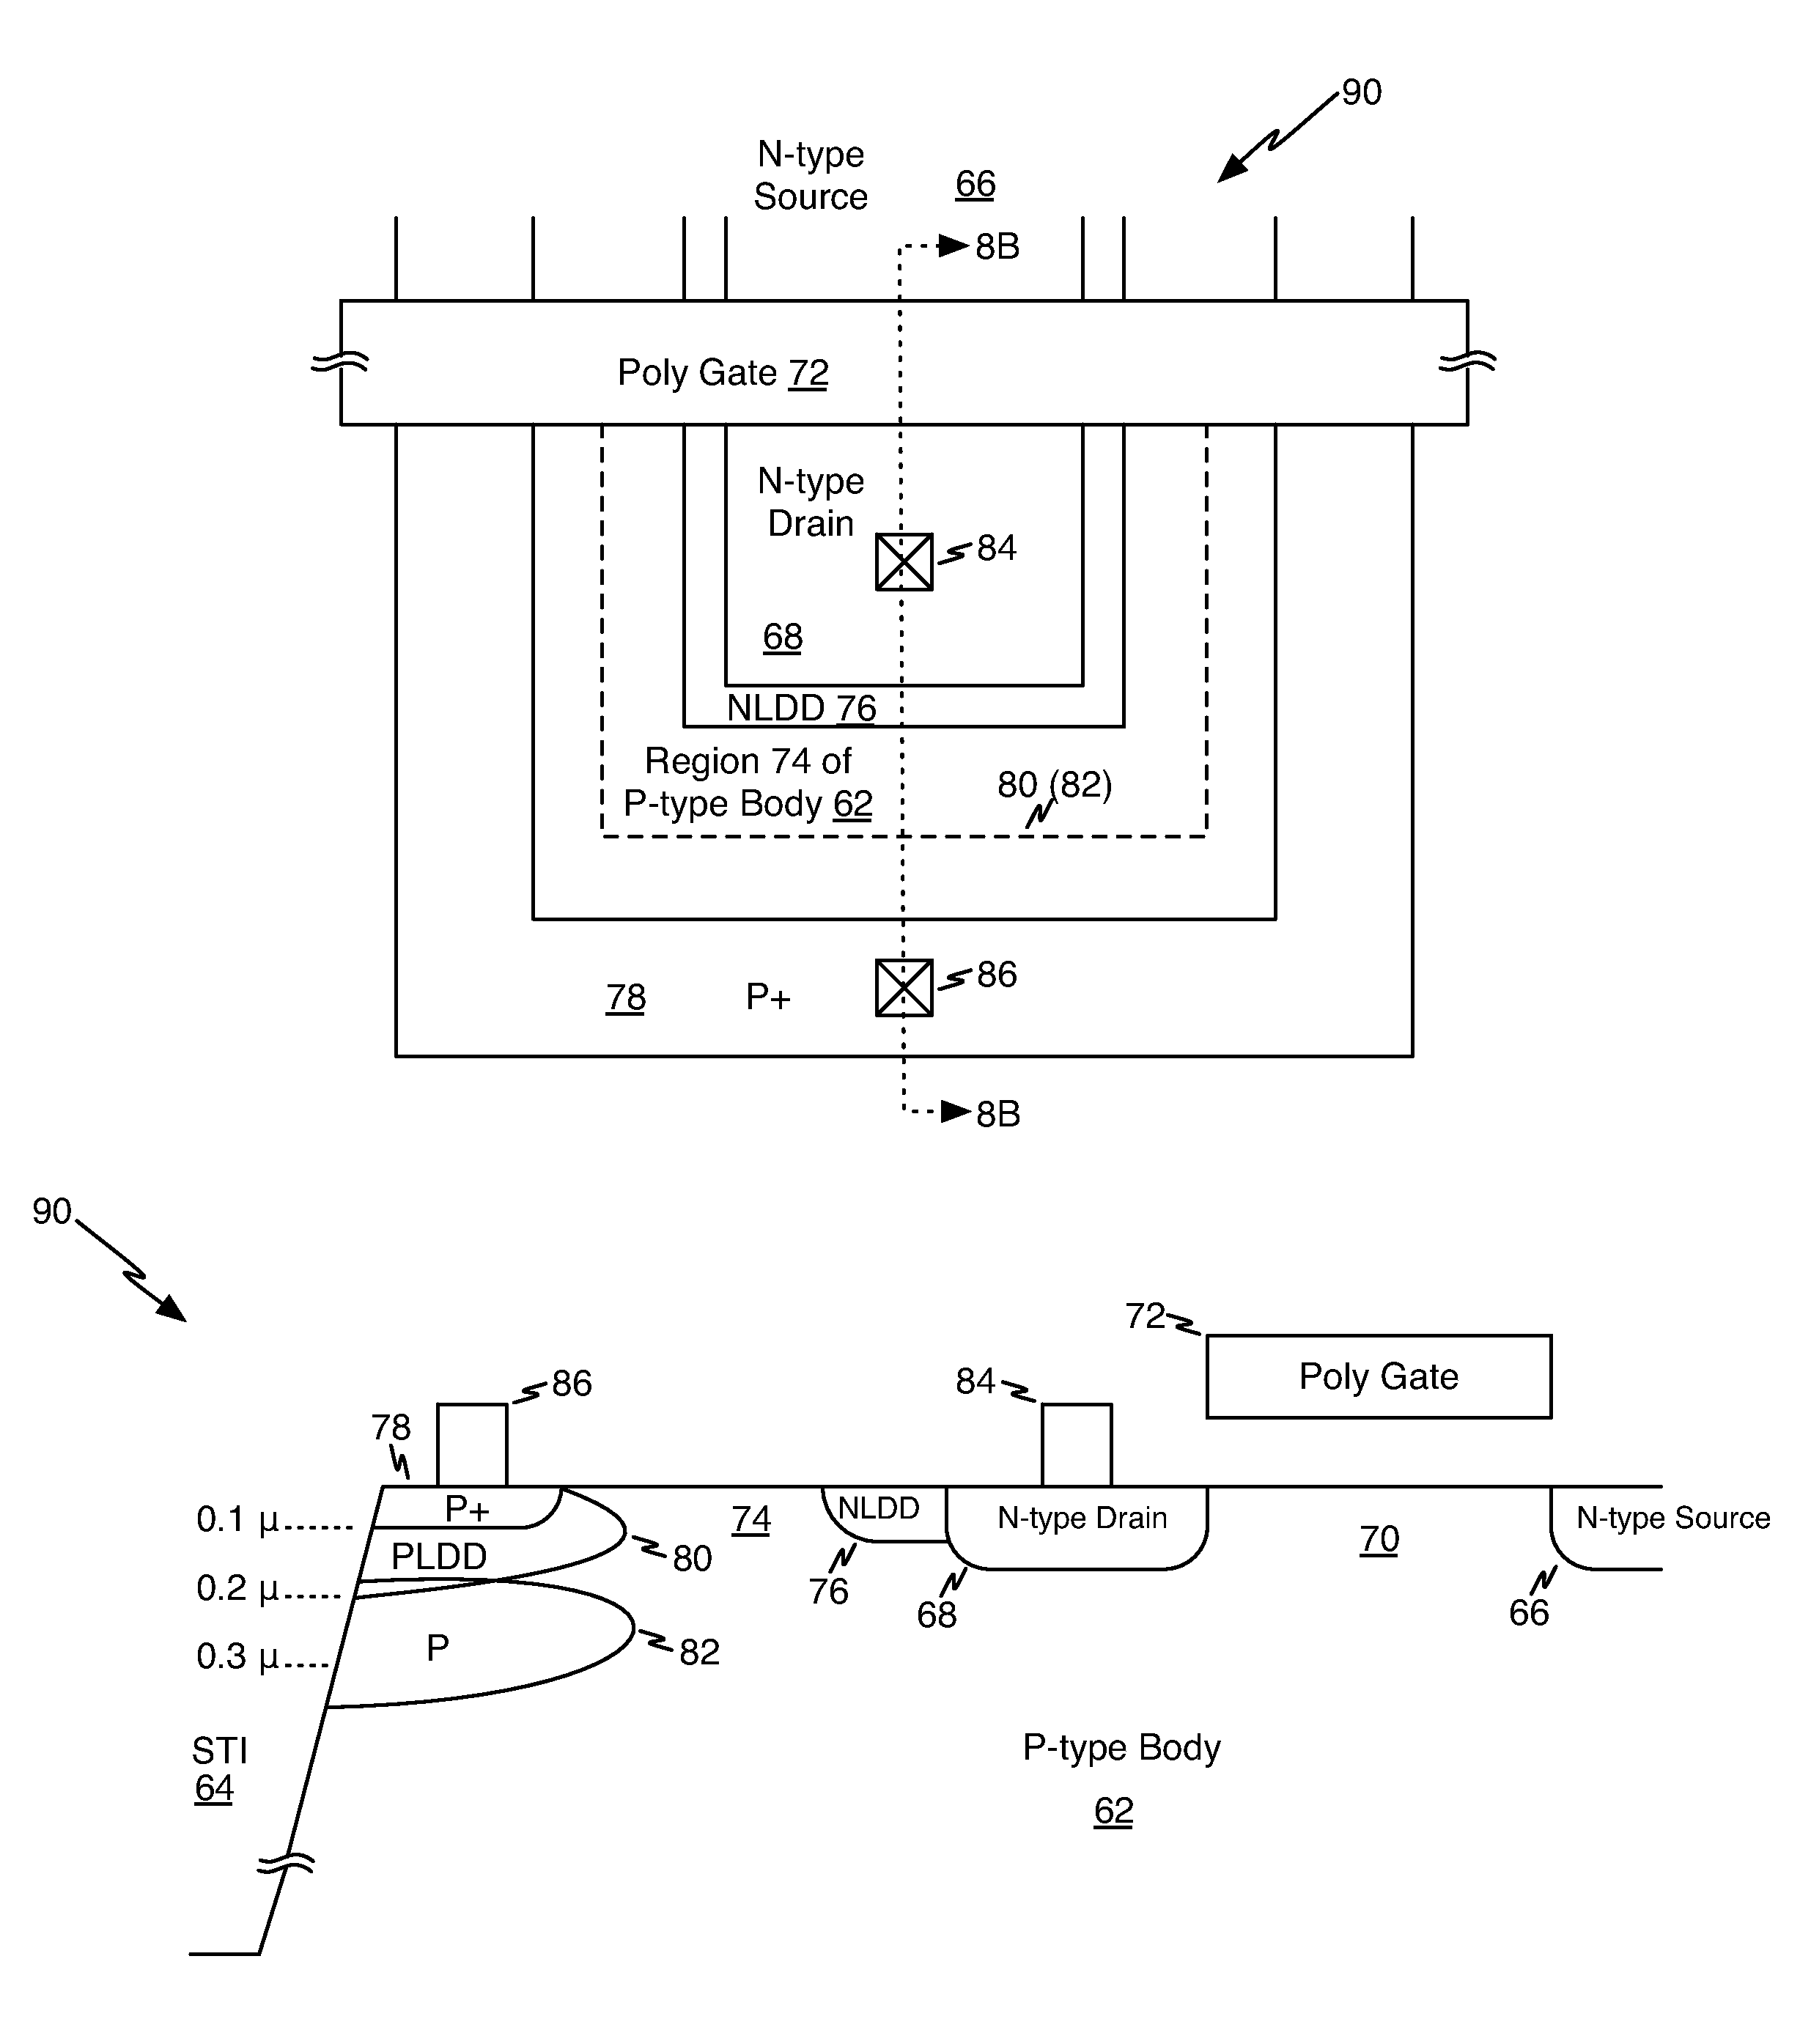 TID hardened and single event transient single event latchup resistant MOS transistors and fabrication process